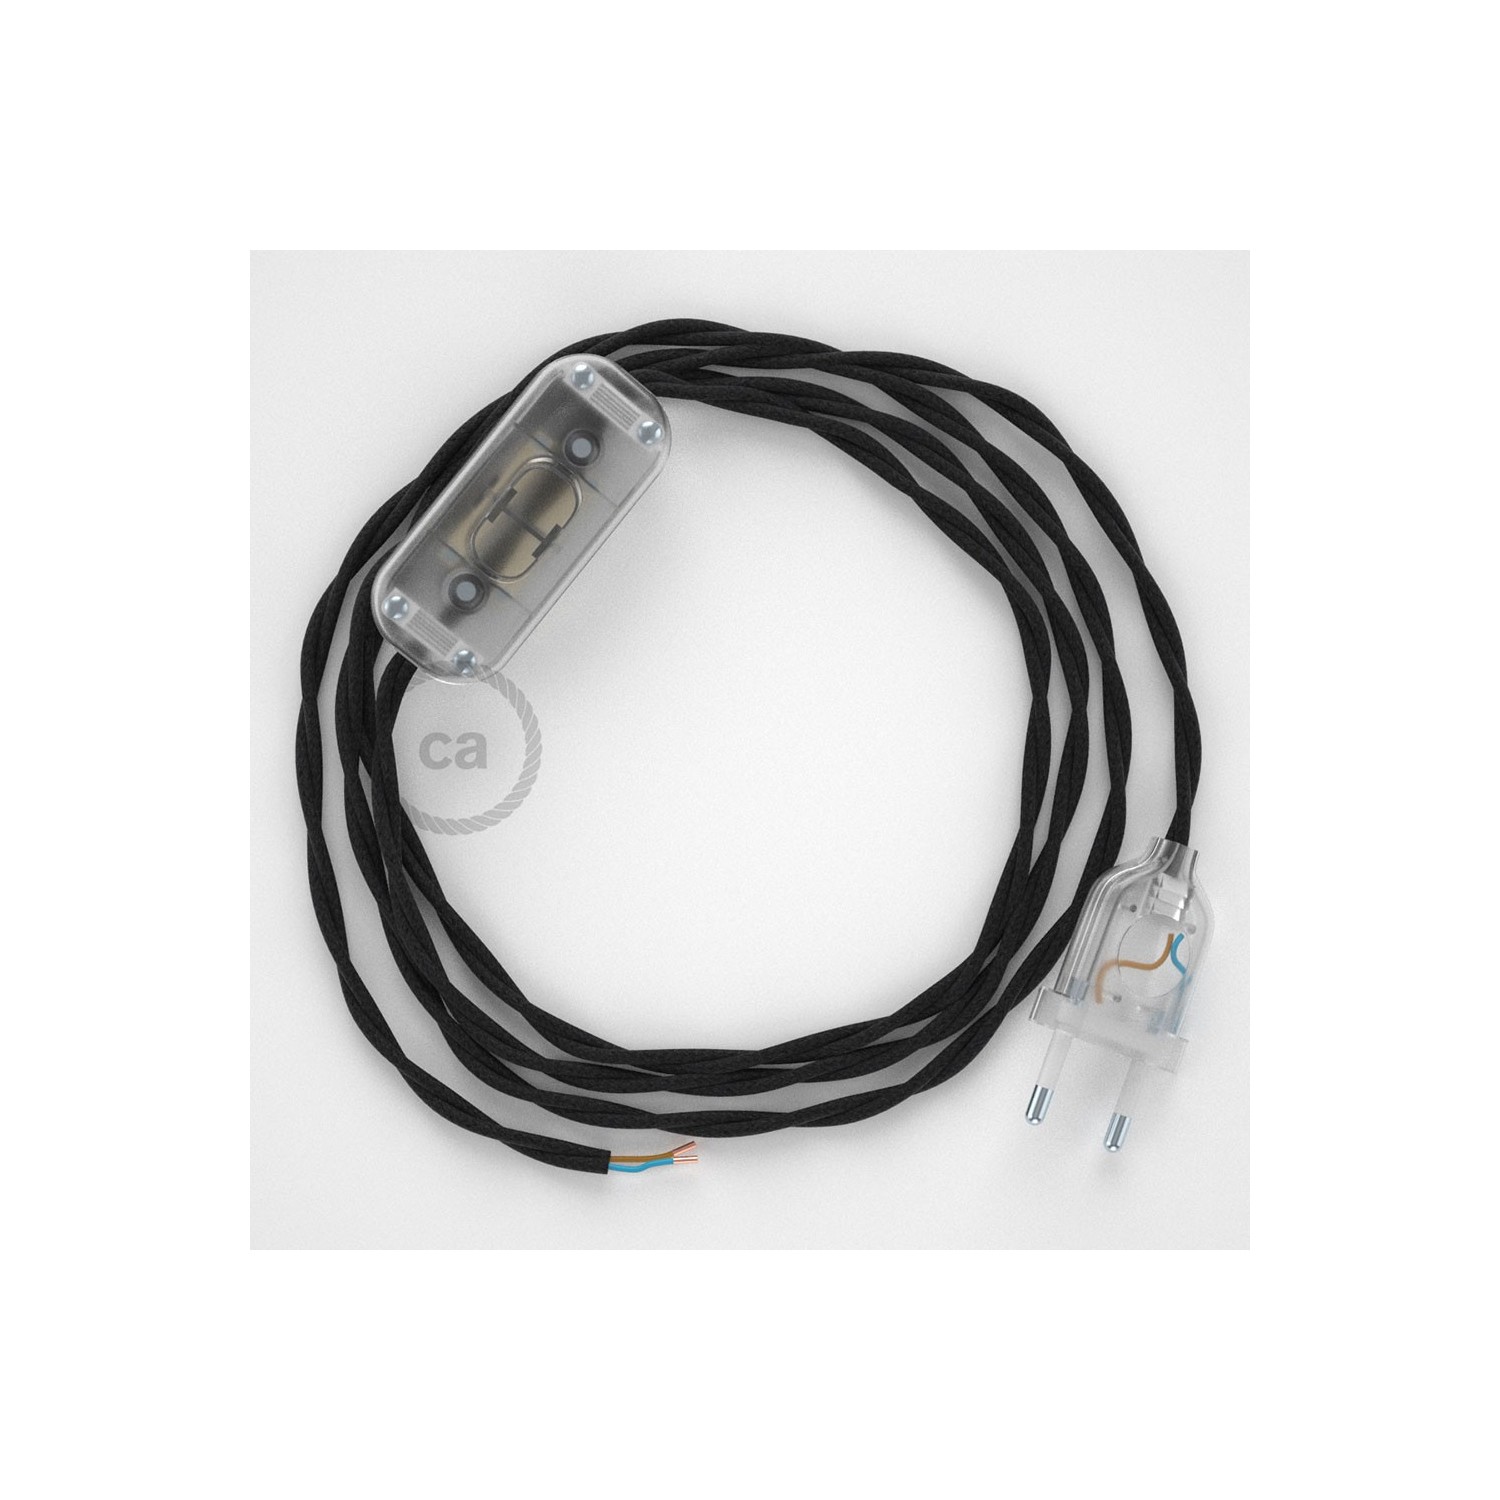 Lamp wiring, TM04 Black Rayon 1,80 m. Choose the colour of the switch and plug.